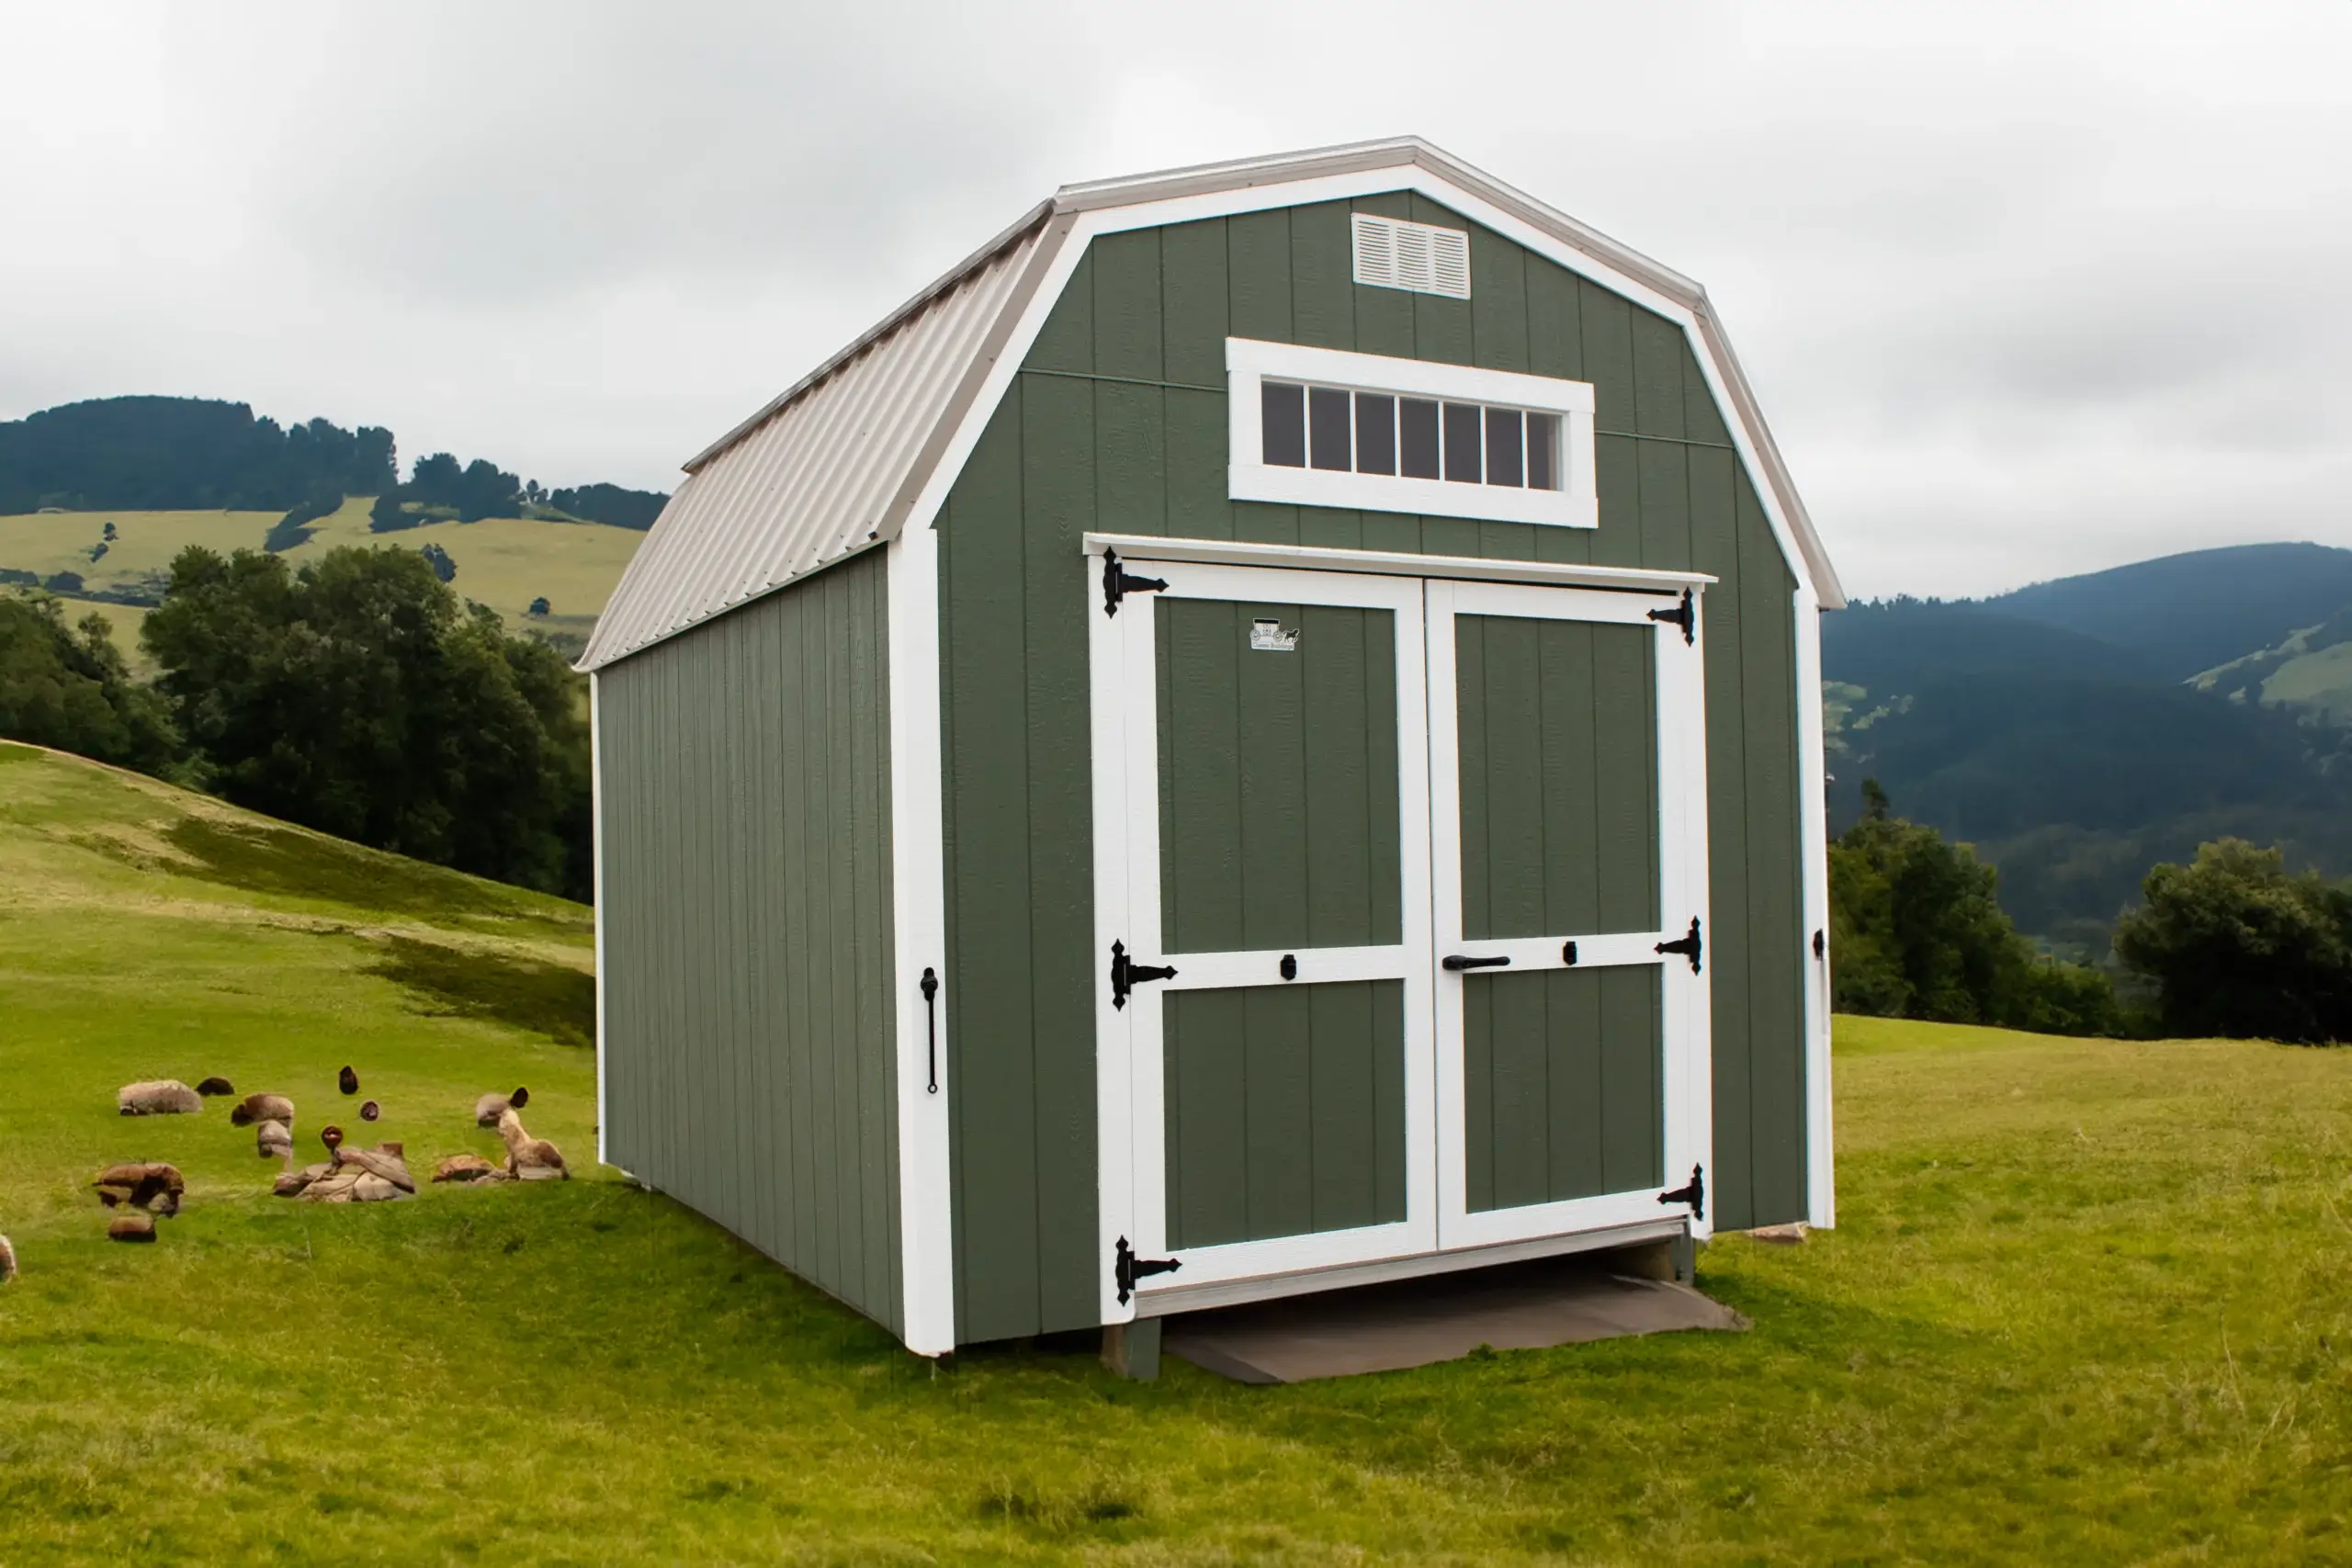 Sheds for Sale Near Me